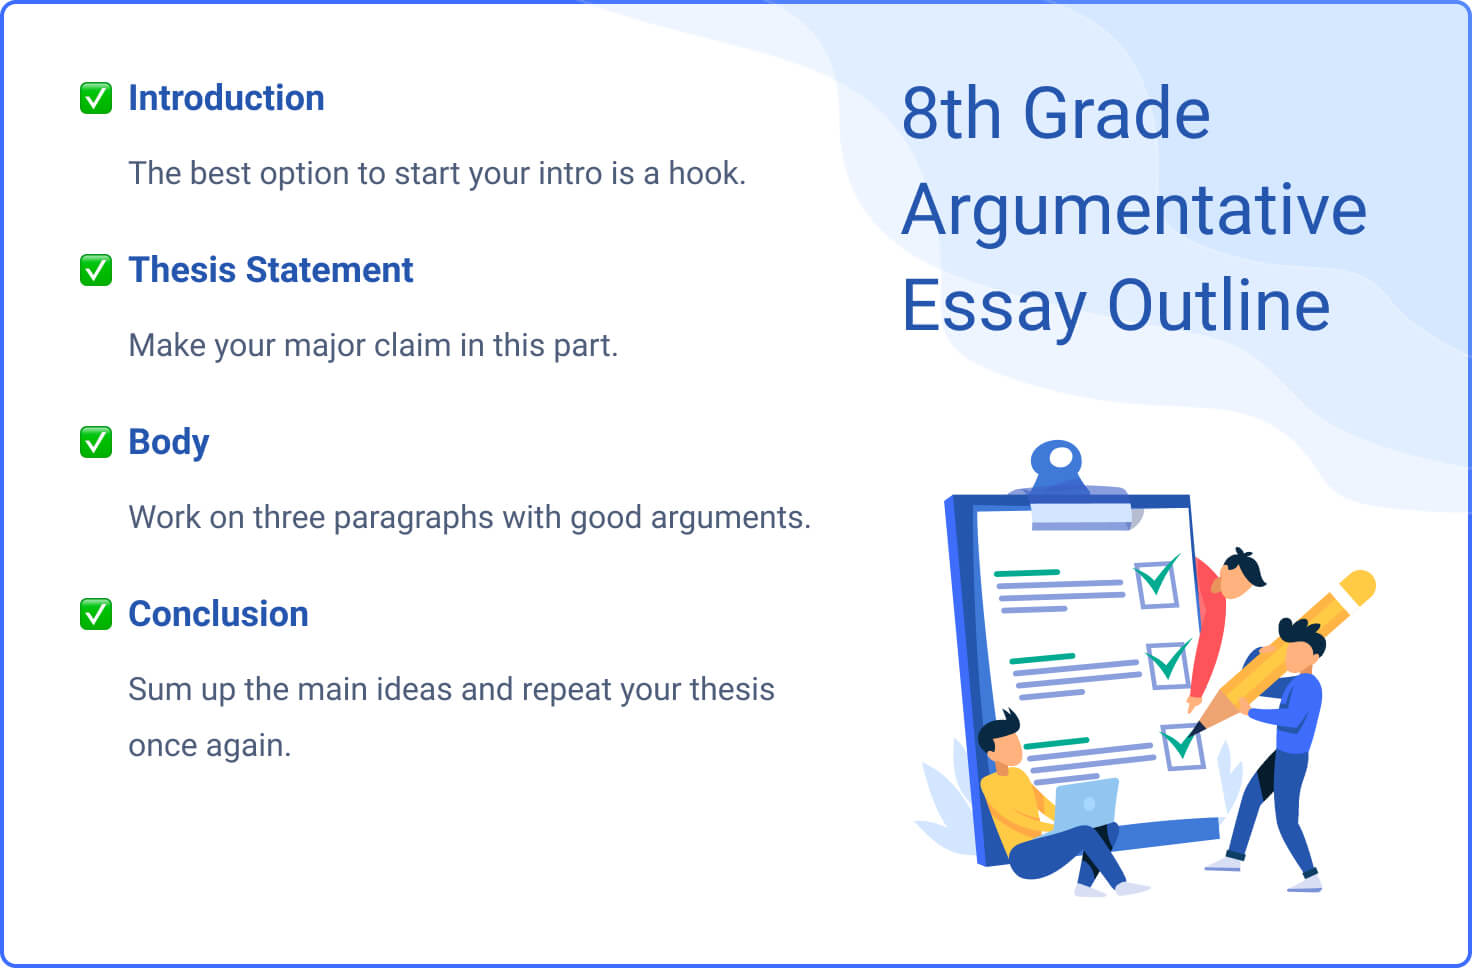 essay guidelines for high school